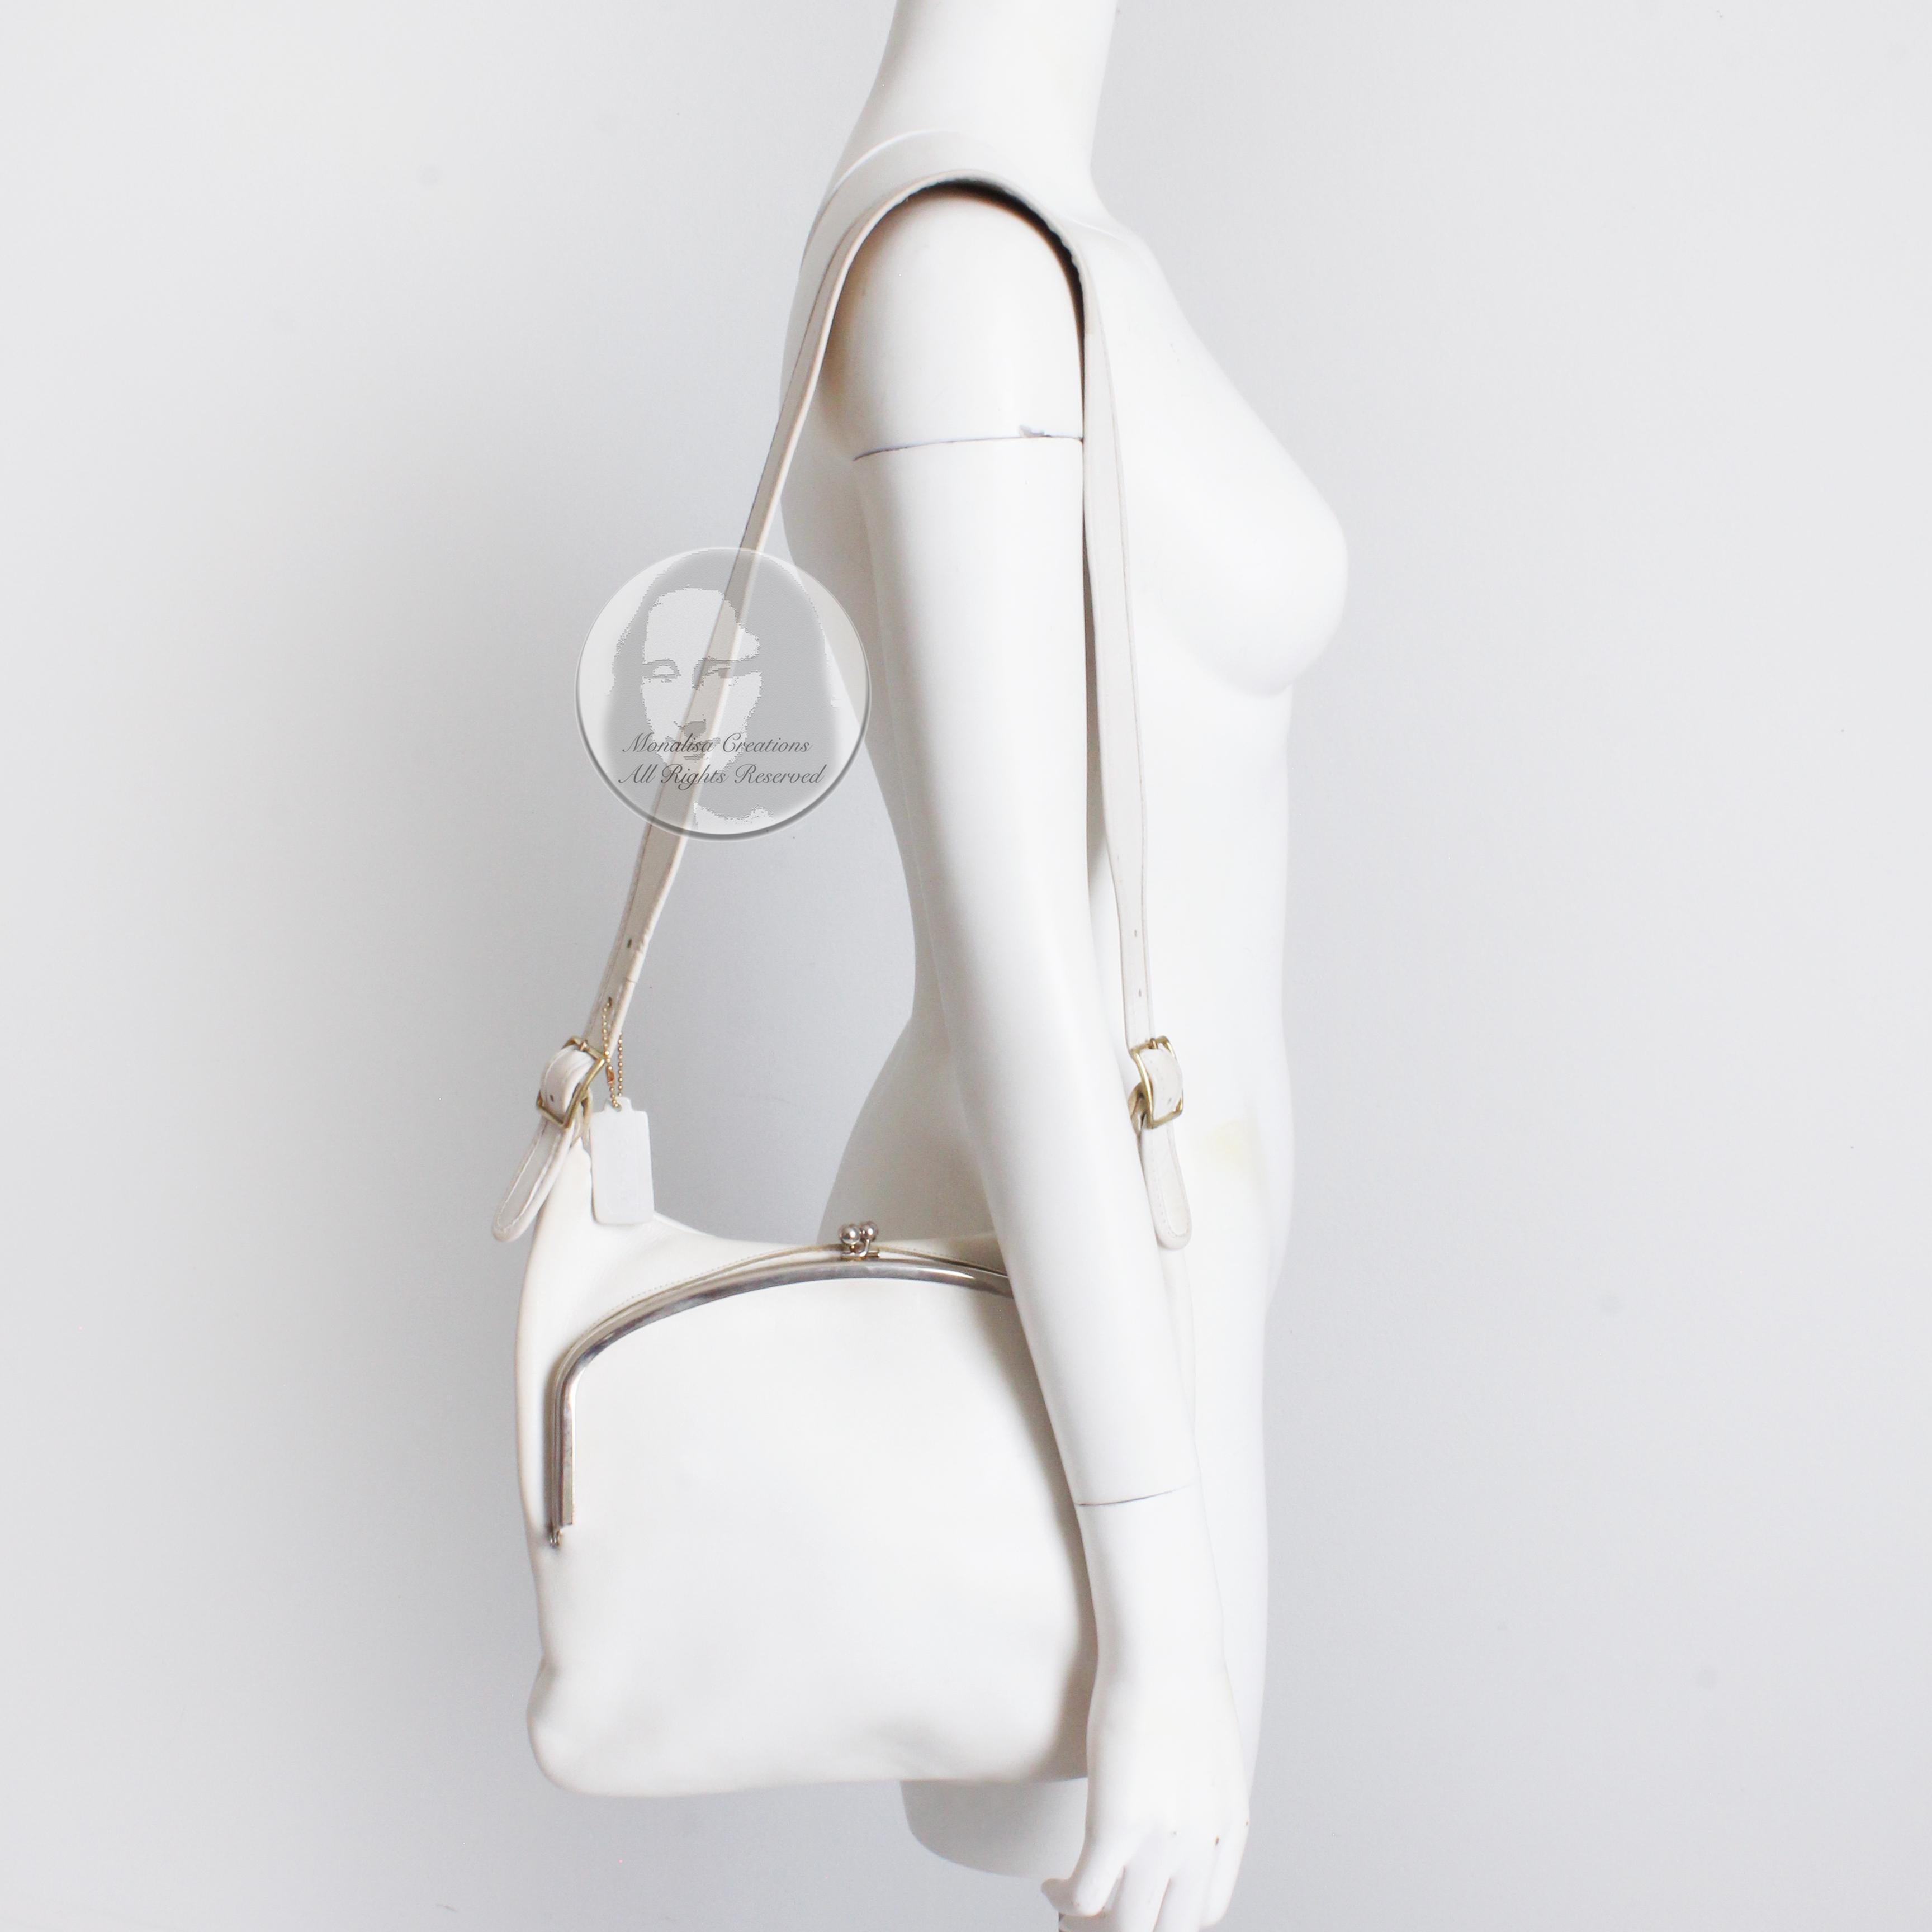 Gray Bonnie Cashin for Coach Frame Bag Rare White Leather with Hang Tag Vintage 70s